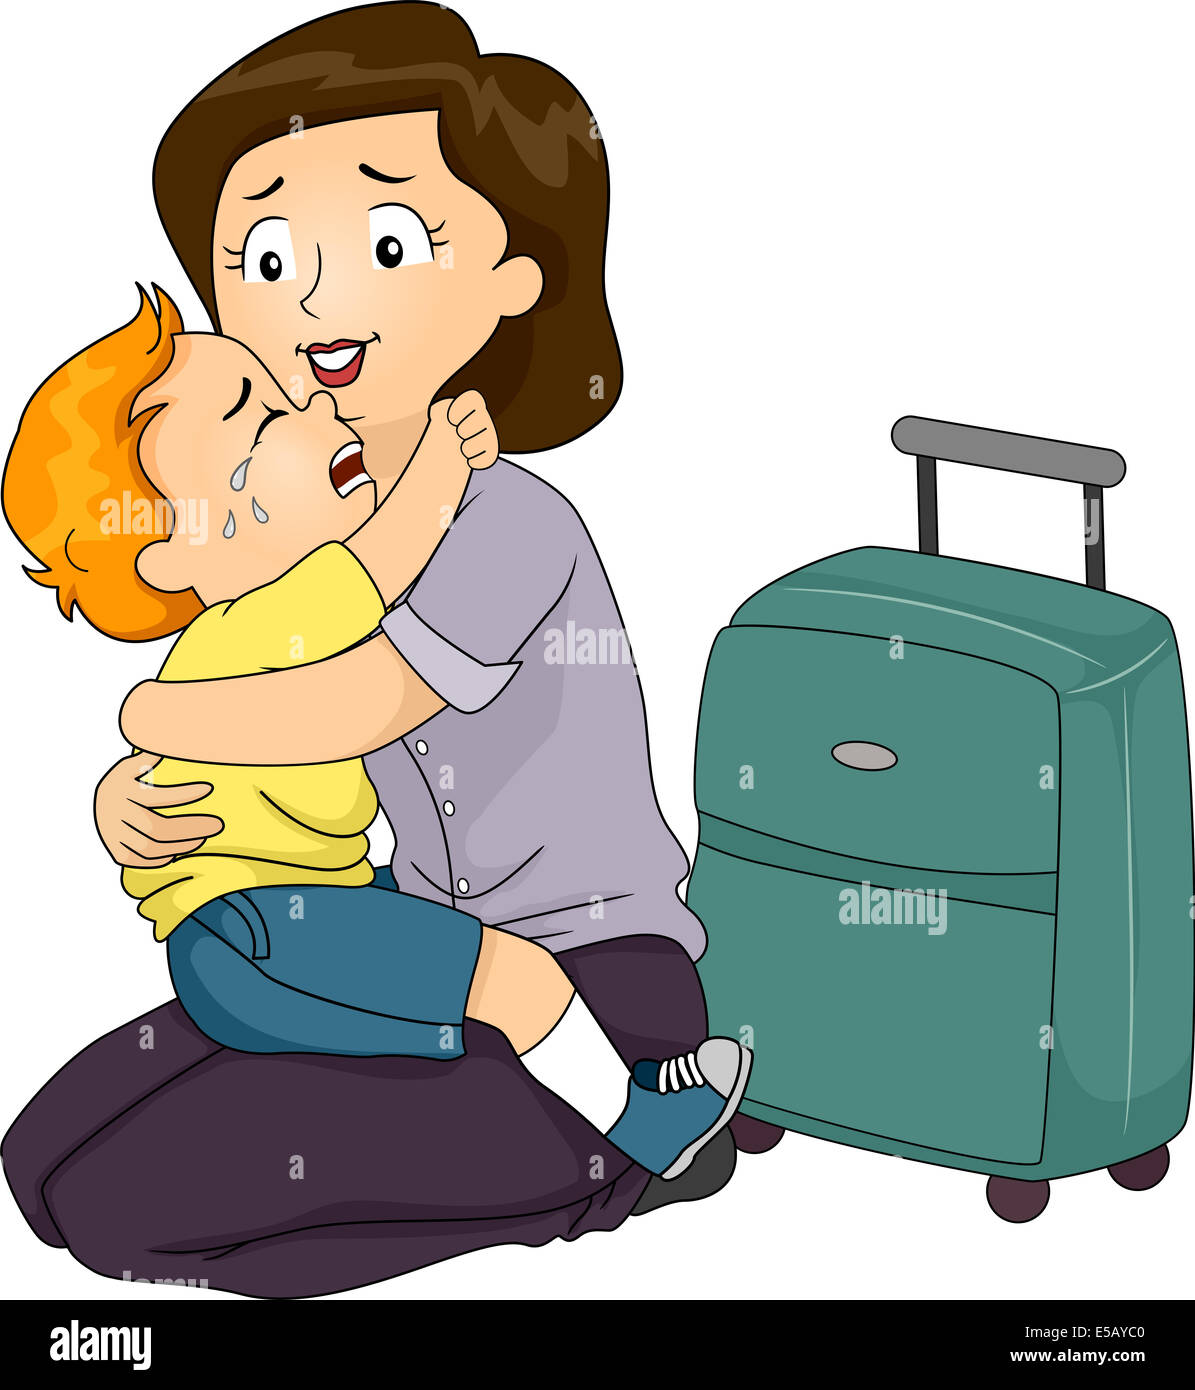 Illustration of a Boy Clinging to His Mother Who is About to Leave Stock Photo